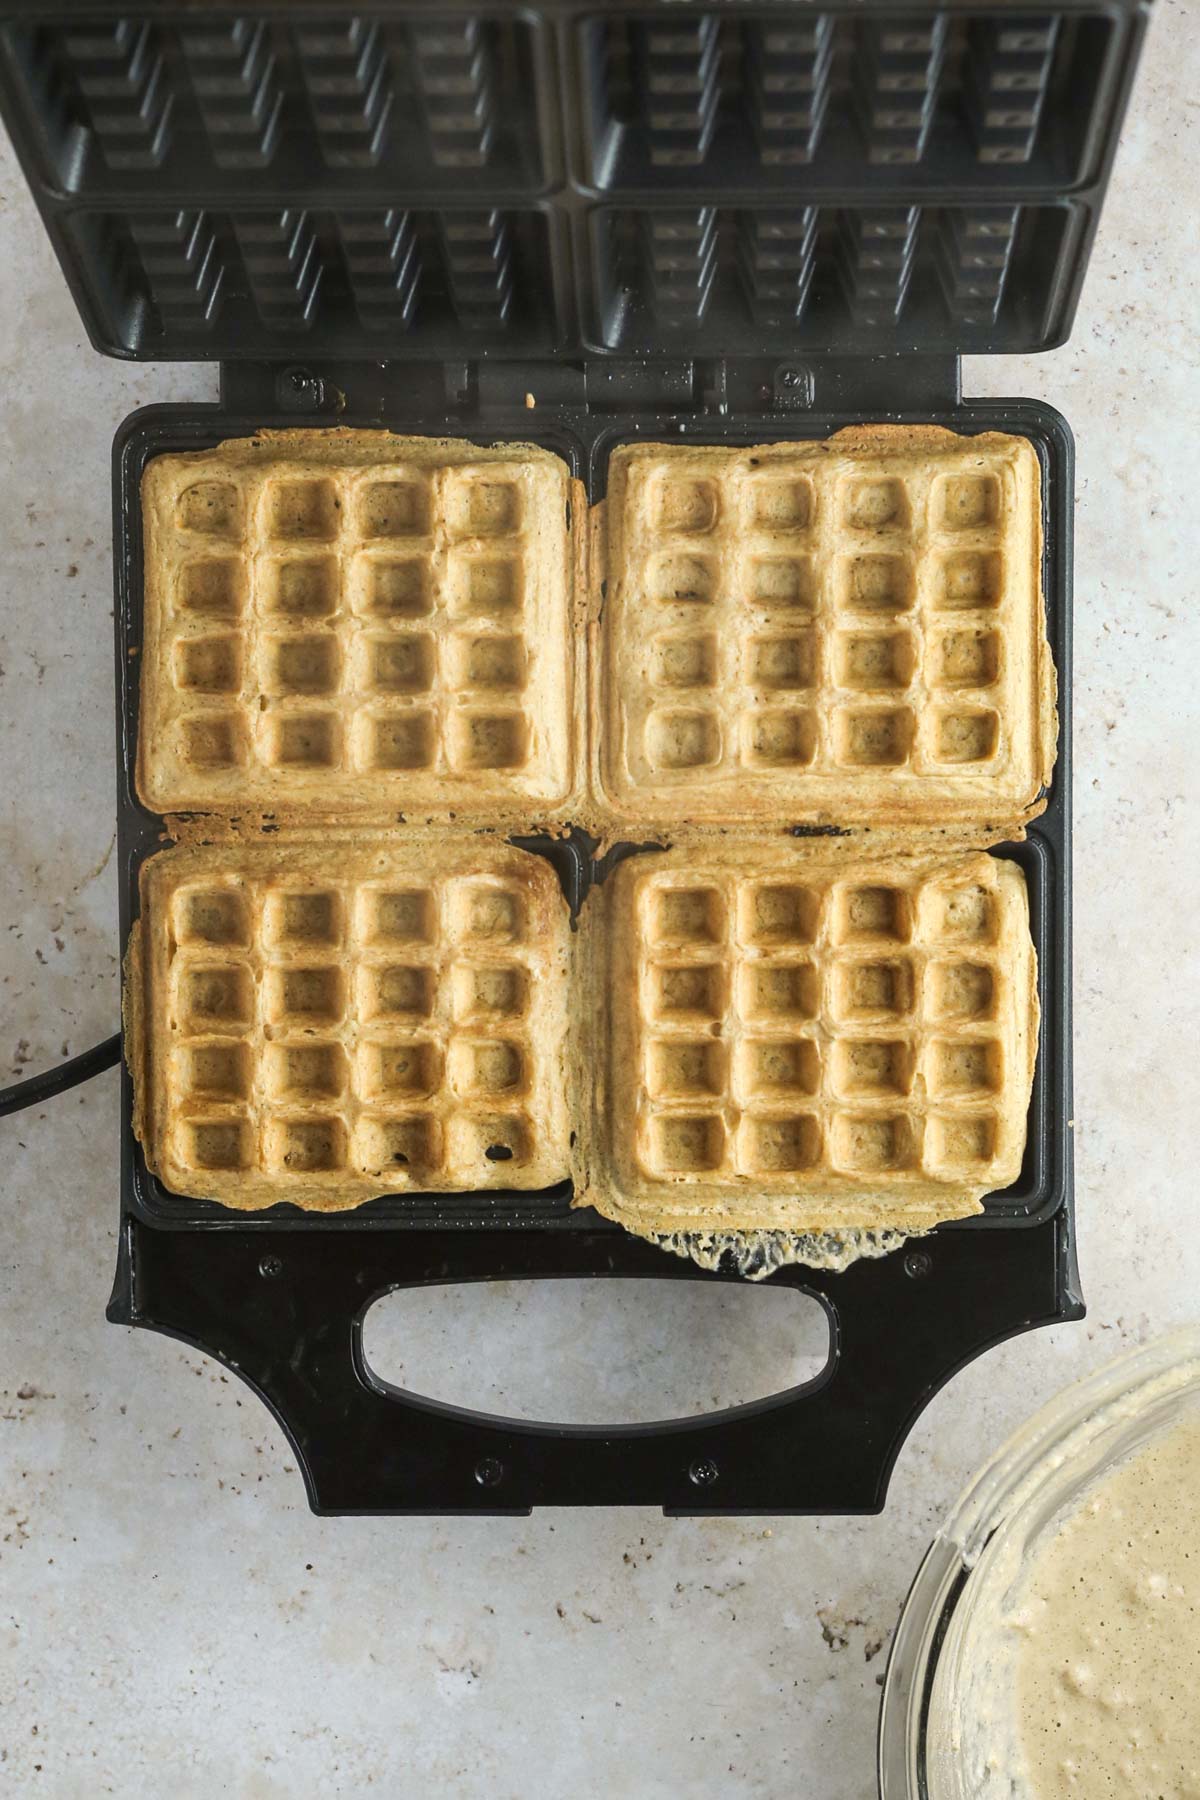 cooked oat flour waffles in the waffle iron before removing them, shown from above. Golden brown in color.